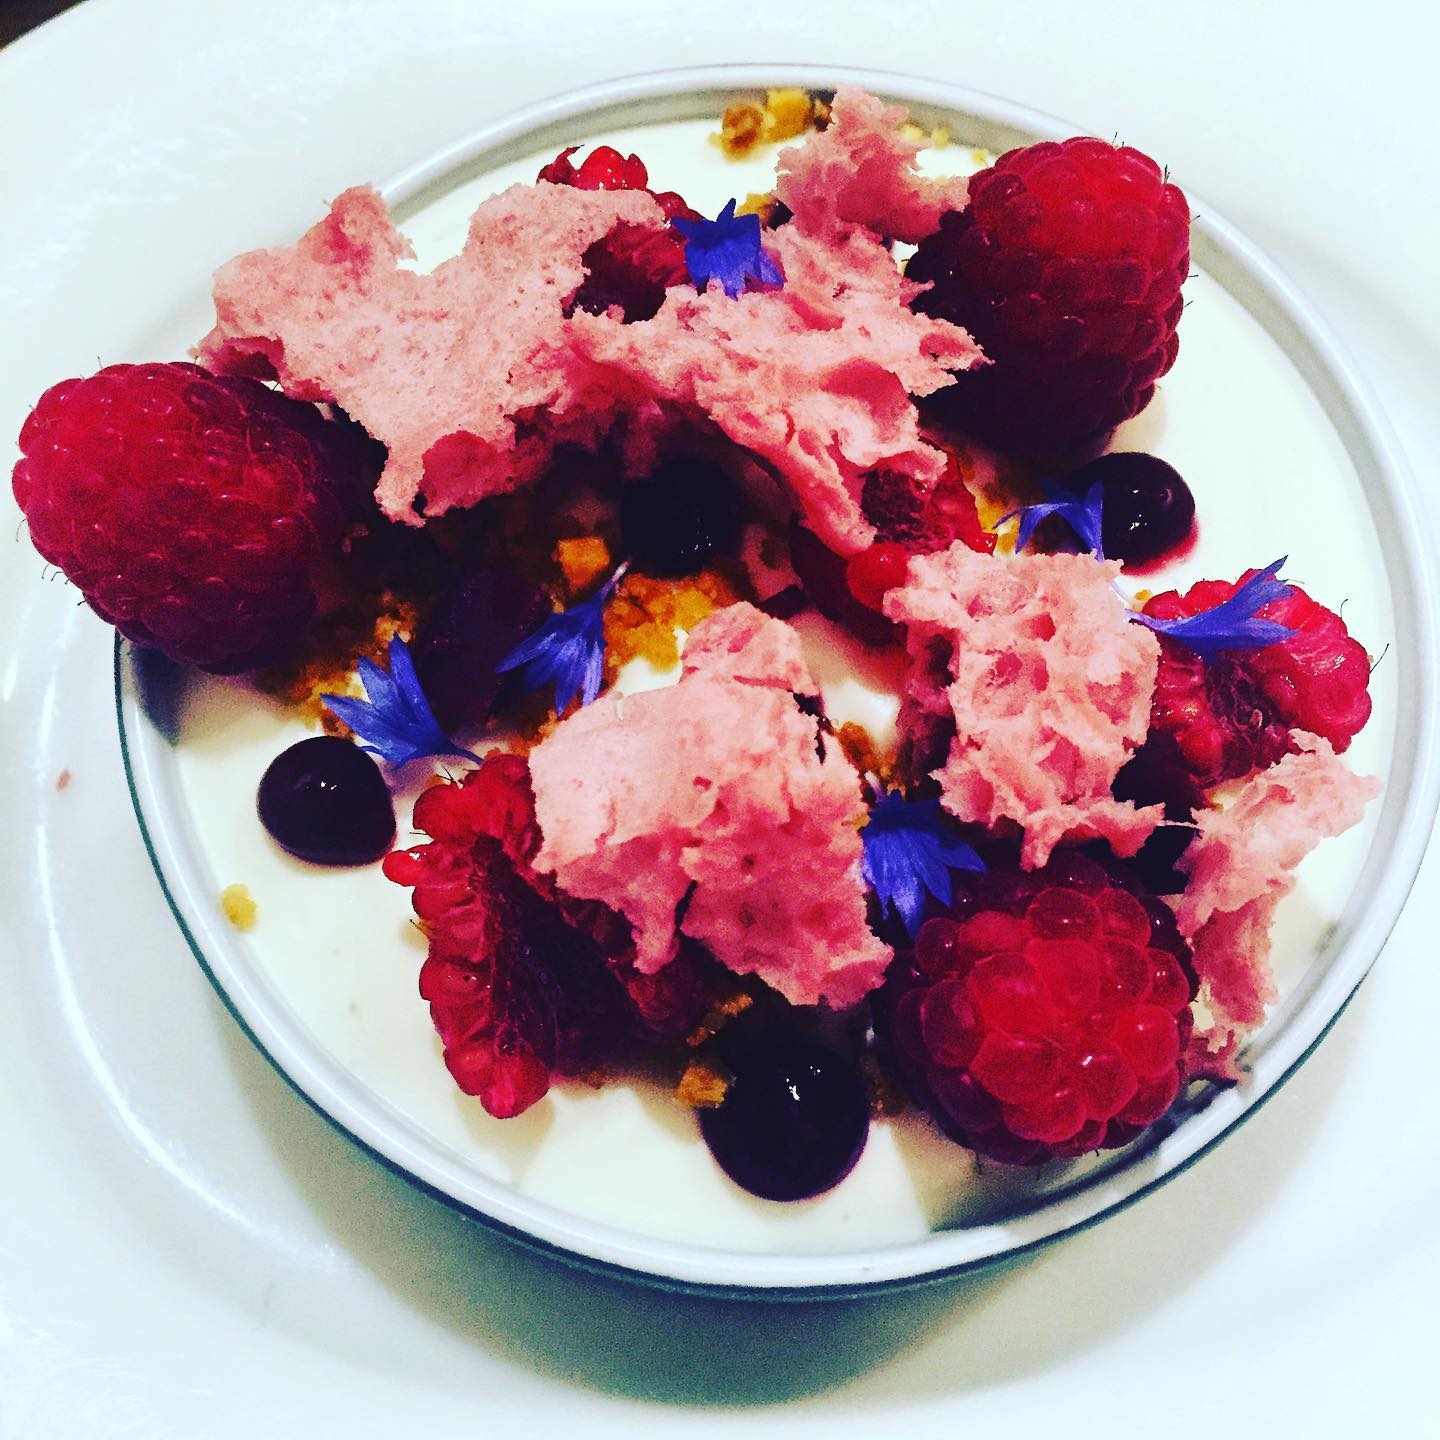 With it’s red fruit, blackberry and strawberry flavors, Pinot noir is the perfect match for these fruits. Nice fruity dessert @dz.envies to go with a light pinot noir #ilovepinotnoir #pinotnoir #dzenvies #blueberry #raspberry #winepairing #dessert #bourgogne  #indulge